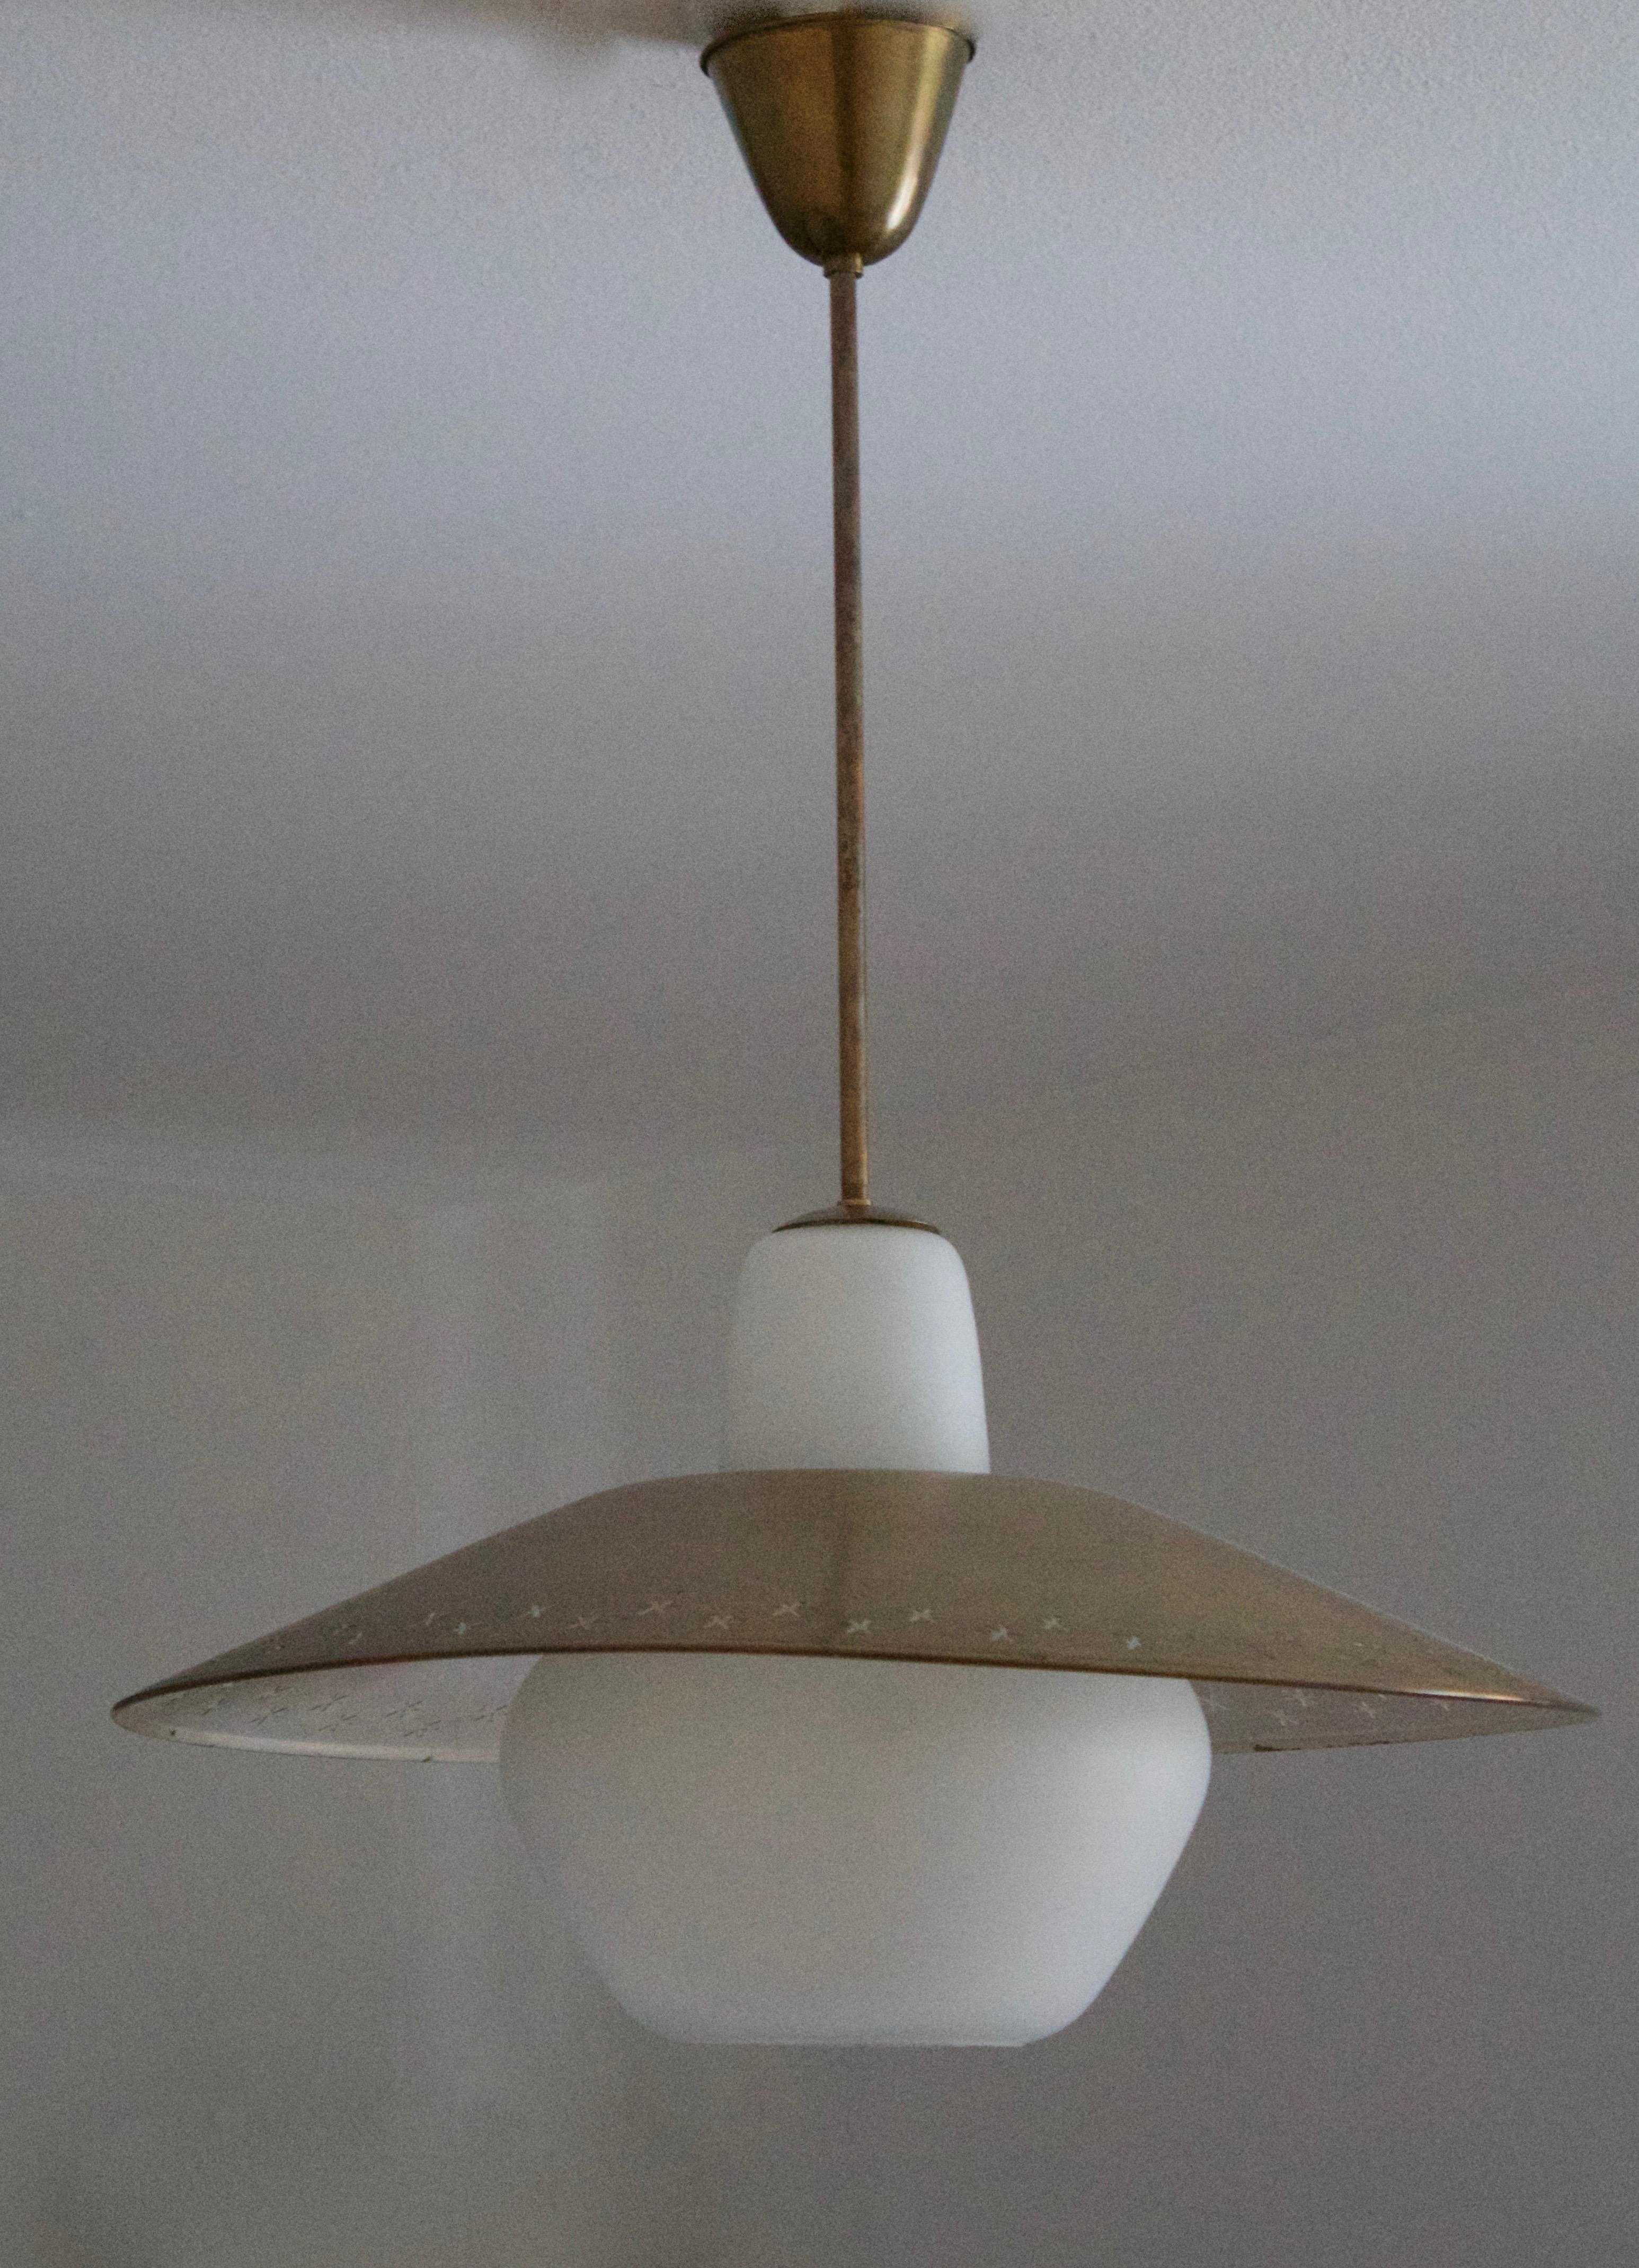 A pendant light. Designed and produced in Sweden, 1940s.